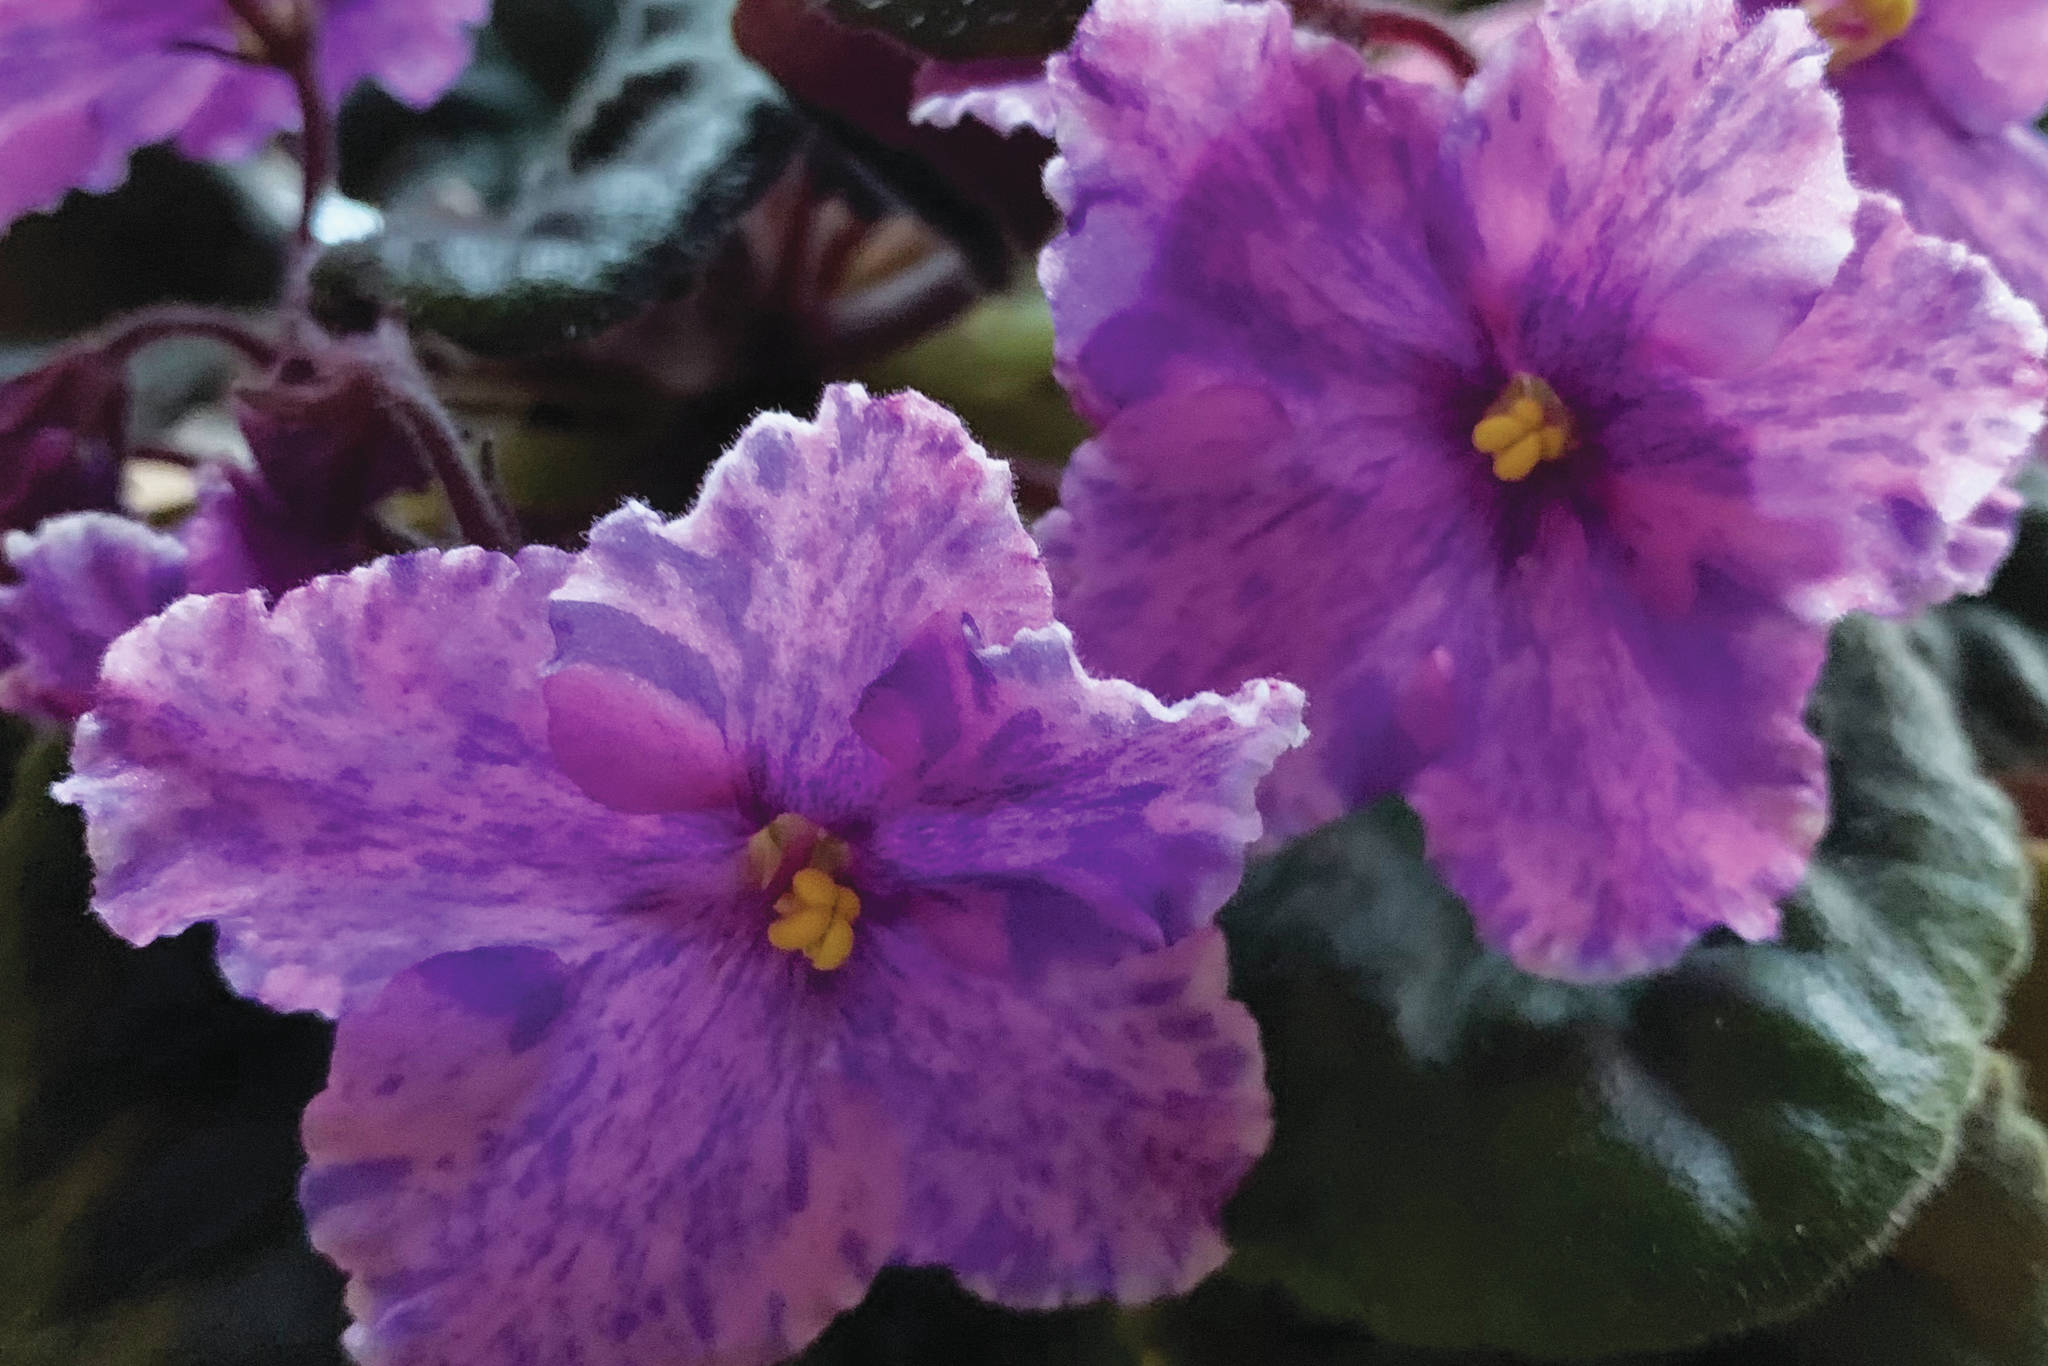 An African violet was started from seed about four years ago provides some spring cheer on April 4, 2021, at the home of the Kachemak Gardener in Homer, Alaska. (Photo by Rosemary Fitzpatrick)